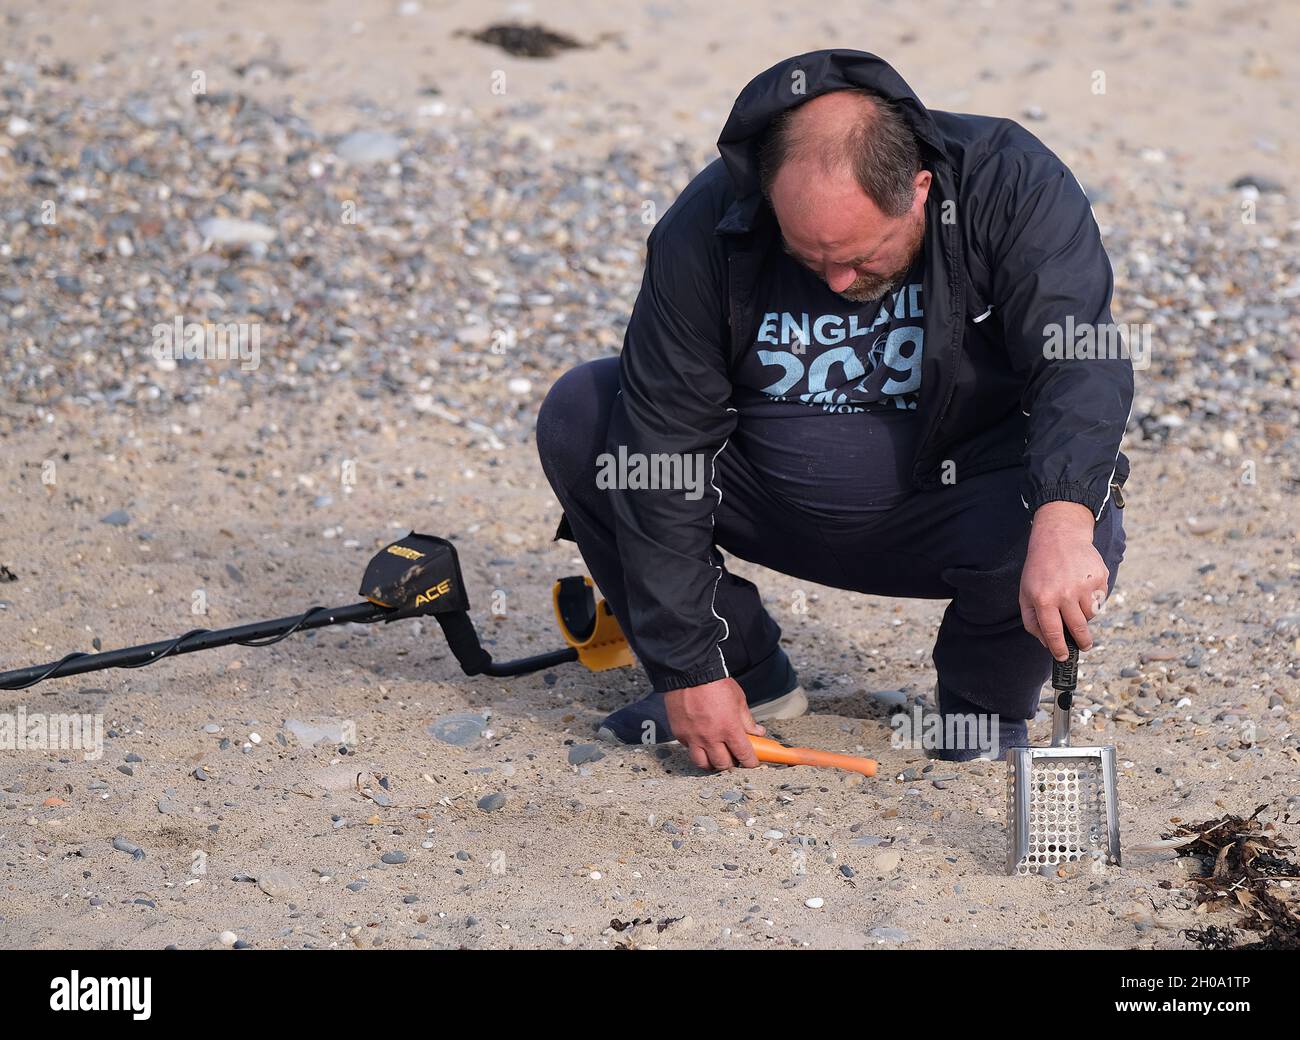 Metal detecting on the beach at a Uk east coast resort. Stock Photo